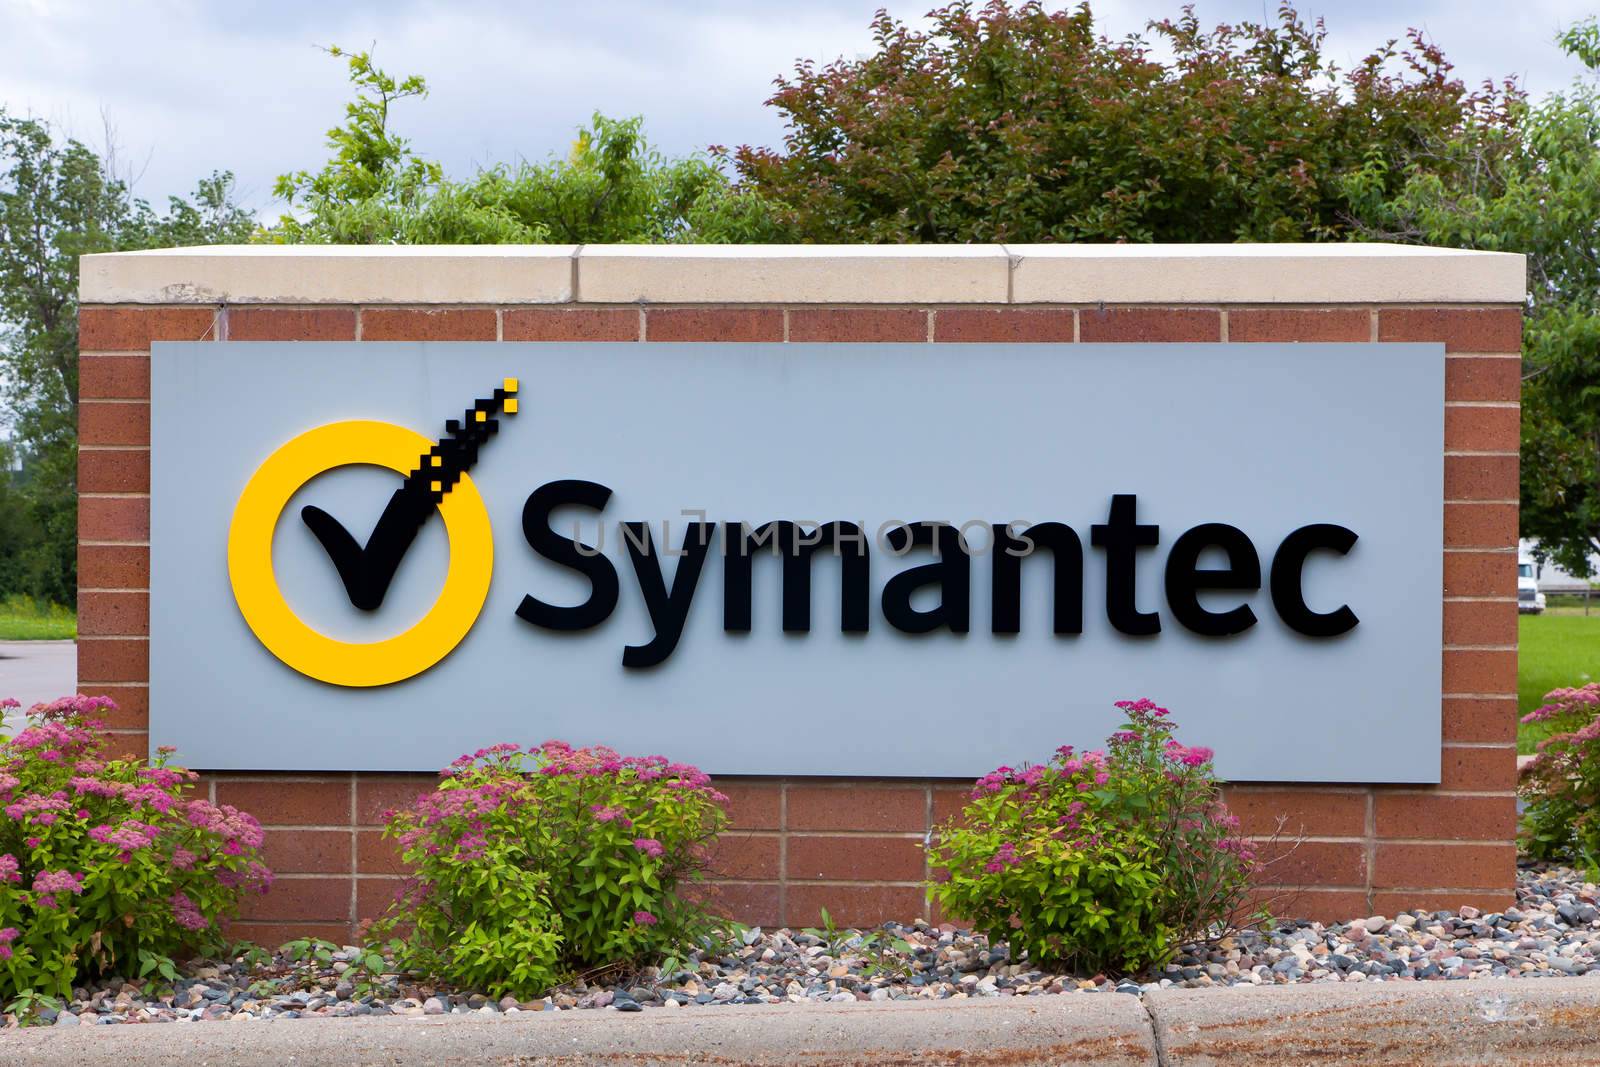 ROSEVILLE, MN/USA - JUNE 28, 2014: Symantec regional office sign. Symantec makes security, storage, backup and availability software and offers professional services to support its software.